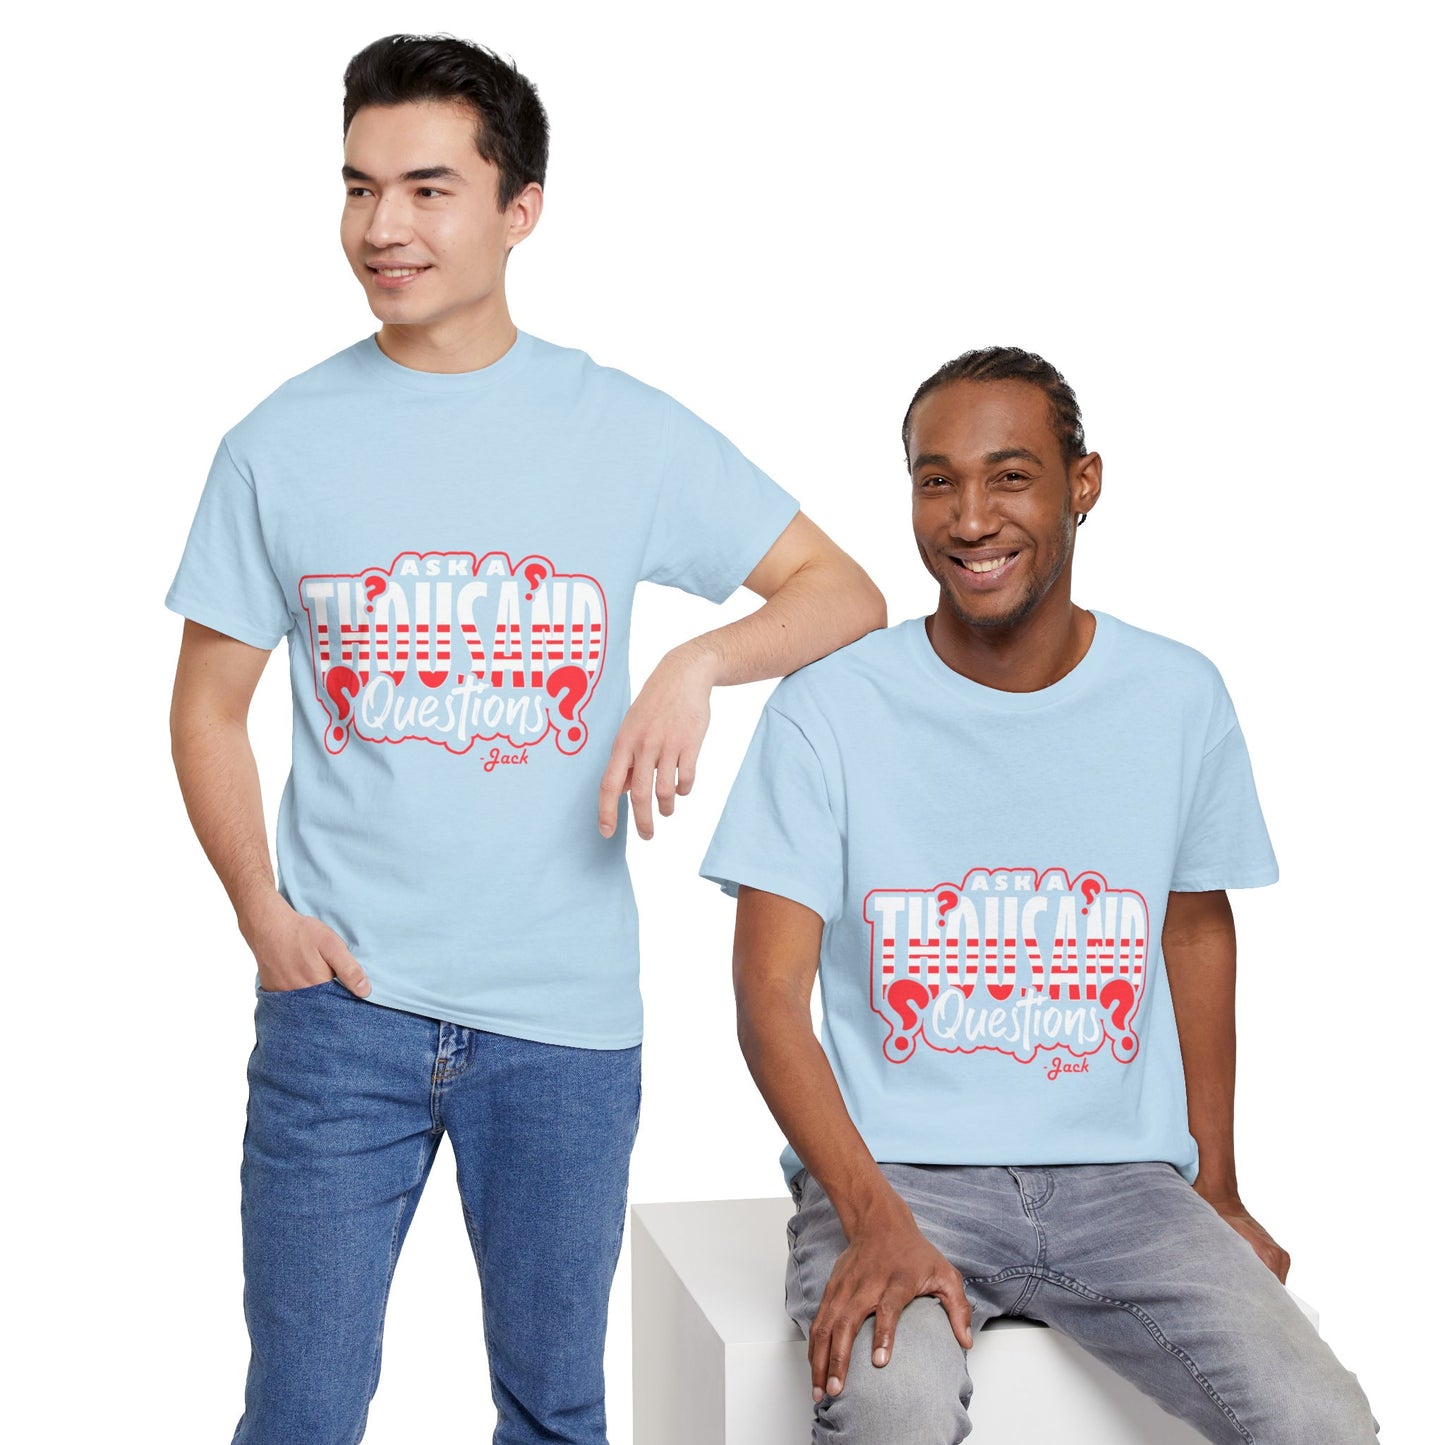 The Philosopher T-Shirt: Ask a thousand questions